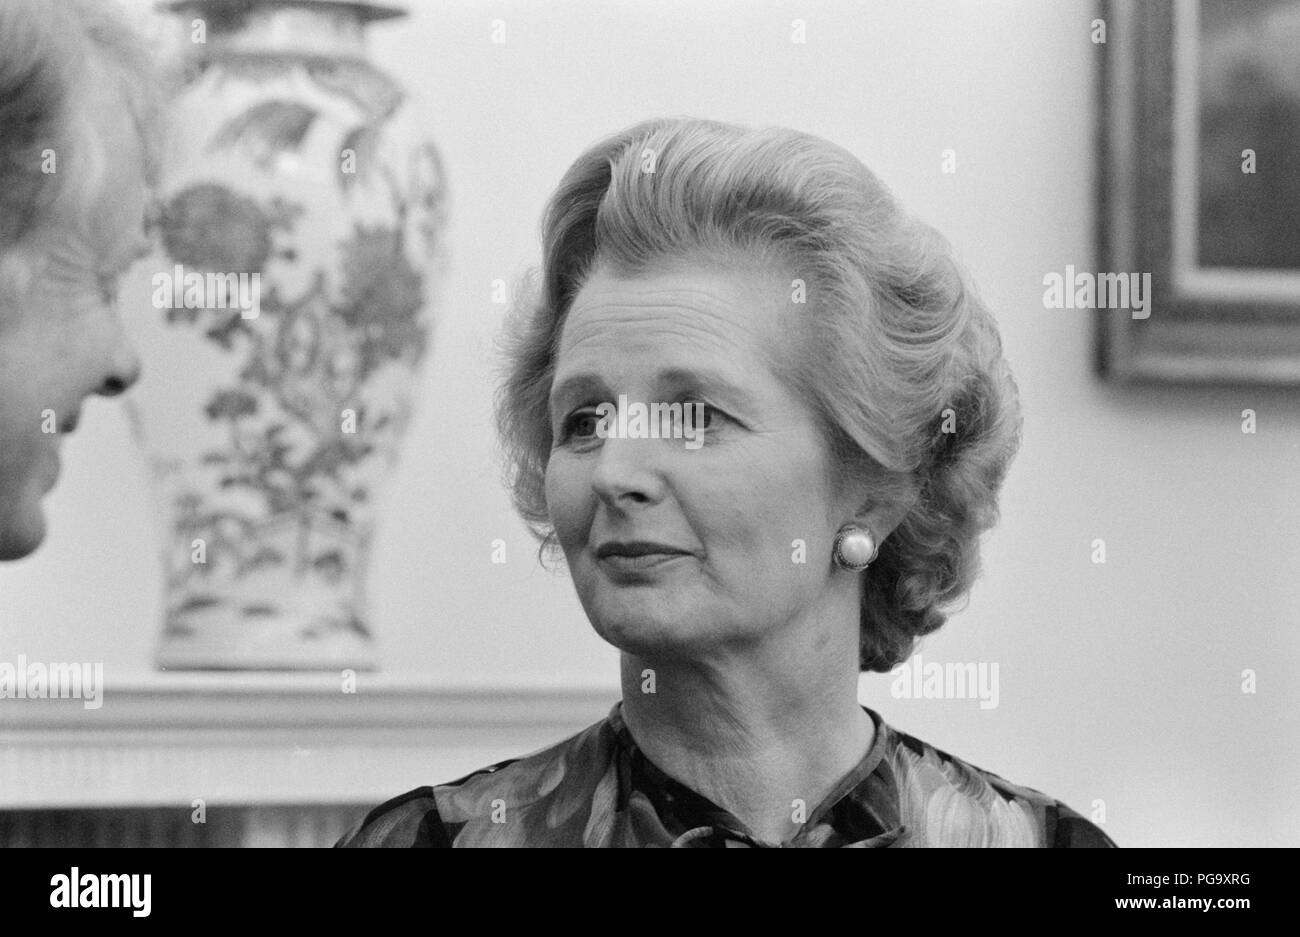 Margaret Hilda Thatcher, Baroness Thatcher, LG, OM, DStJ, PC, FRS, HonFRSC (née Roberts; 13 October 1925 – 8 April 2013) was a British stateswoman who served as Prime Minister of the United Kingdom from 1979 to 1990 and Leader of the Conservative Party from 1975 to 1990. She was the longest-serving British prime minister of the 20th century and the first woman to hold that office. A Soviet journalist dubbed her the Iron Lady, a nickname that became associated with her uncompromising politics and leadership style. As Prime Minister, she implemented policies known as Thatcherism. Stock Photo